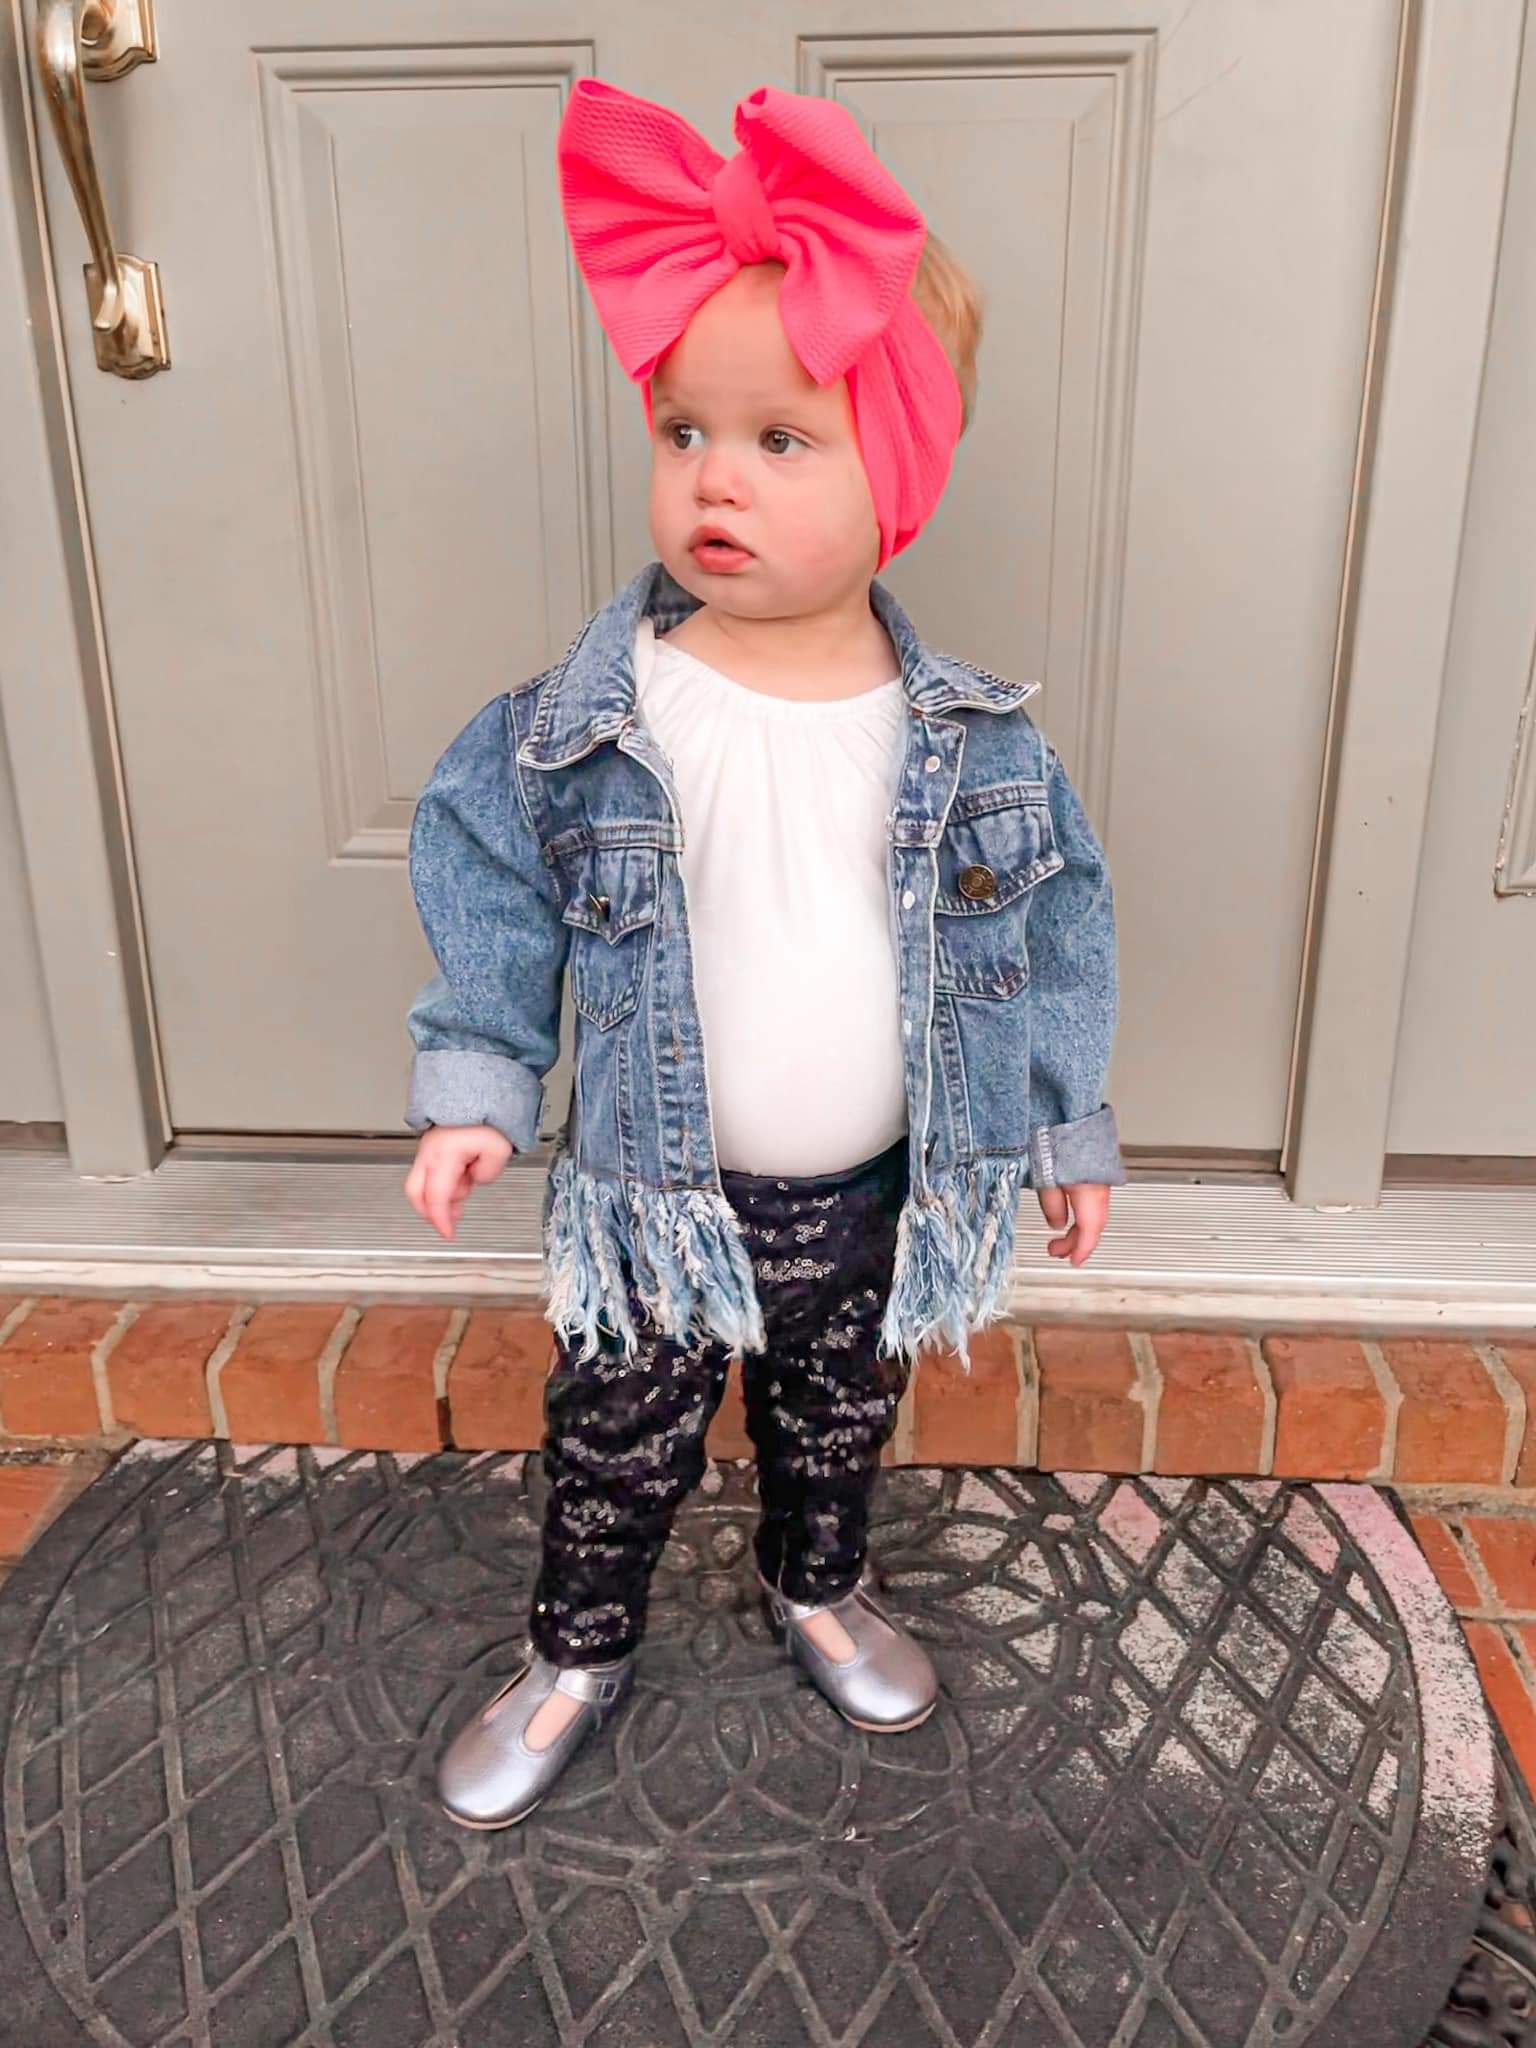 Distressed Front Baby Leggings - Baby Clothing